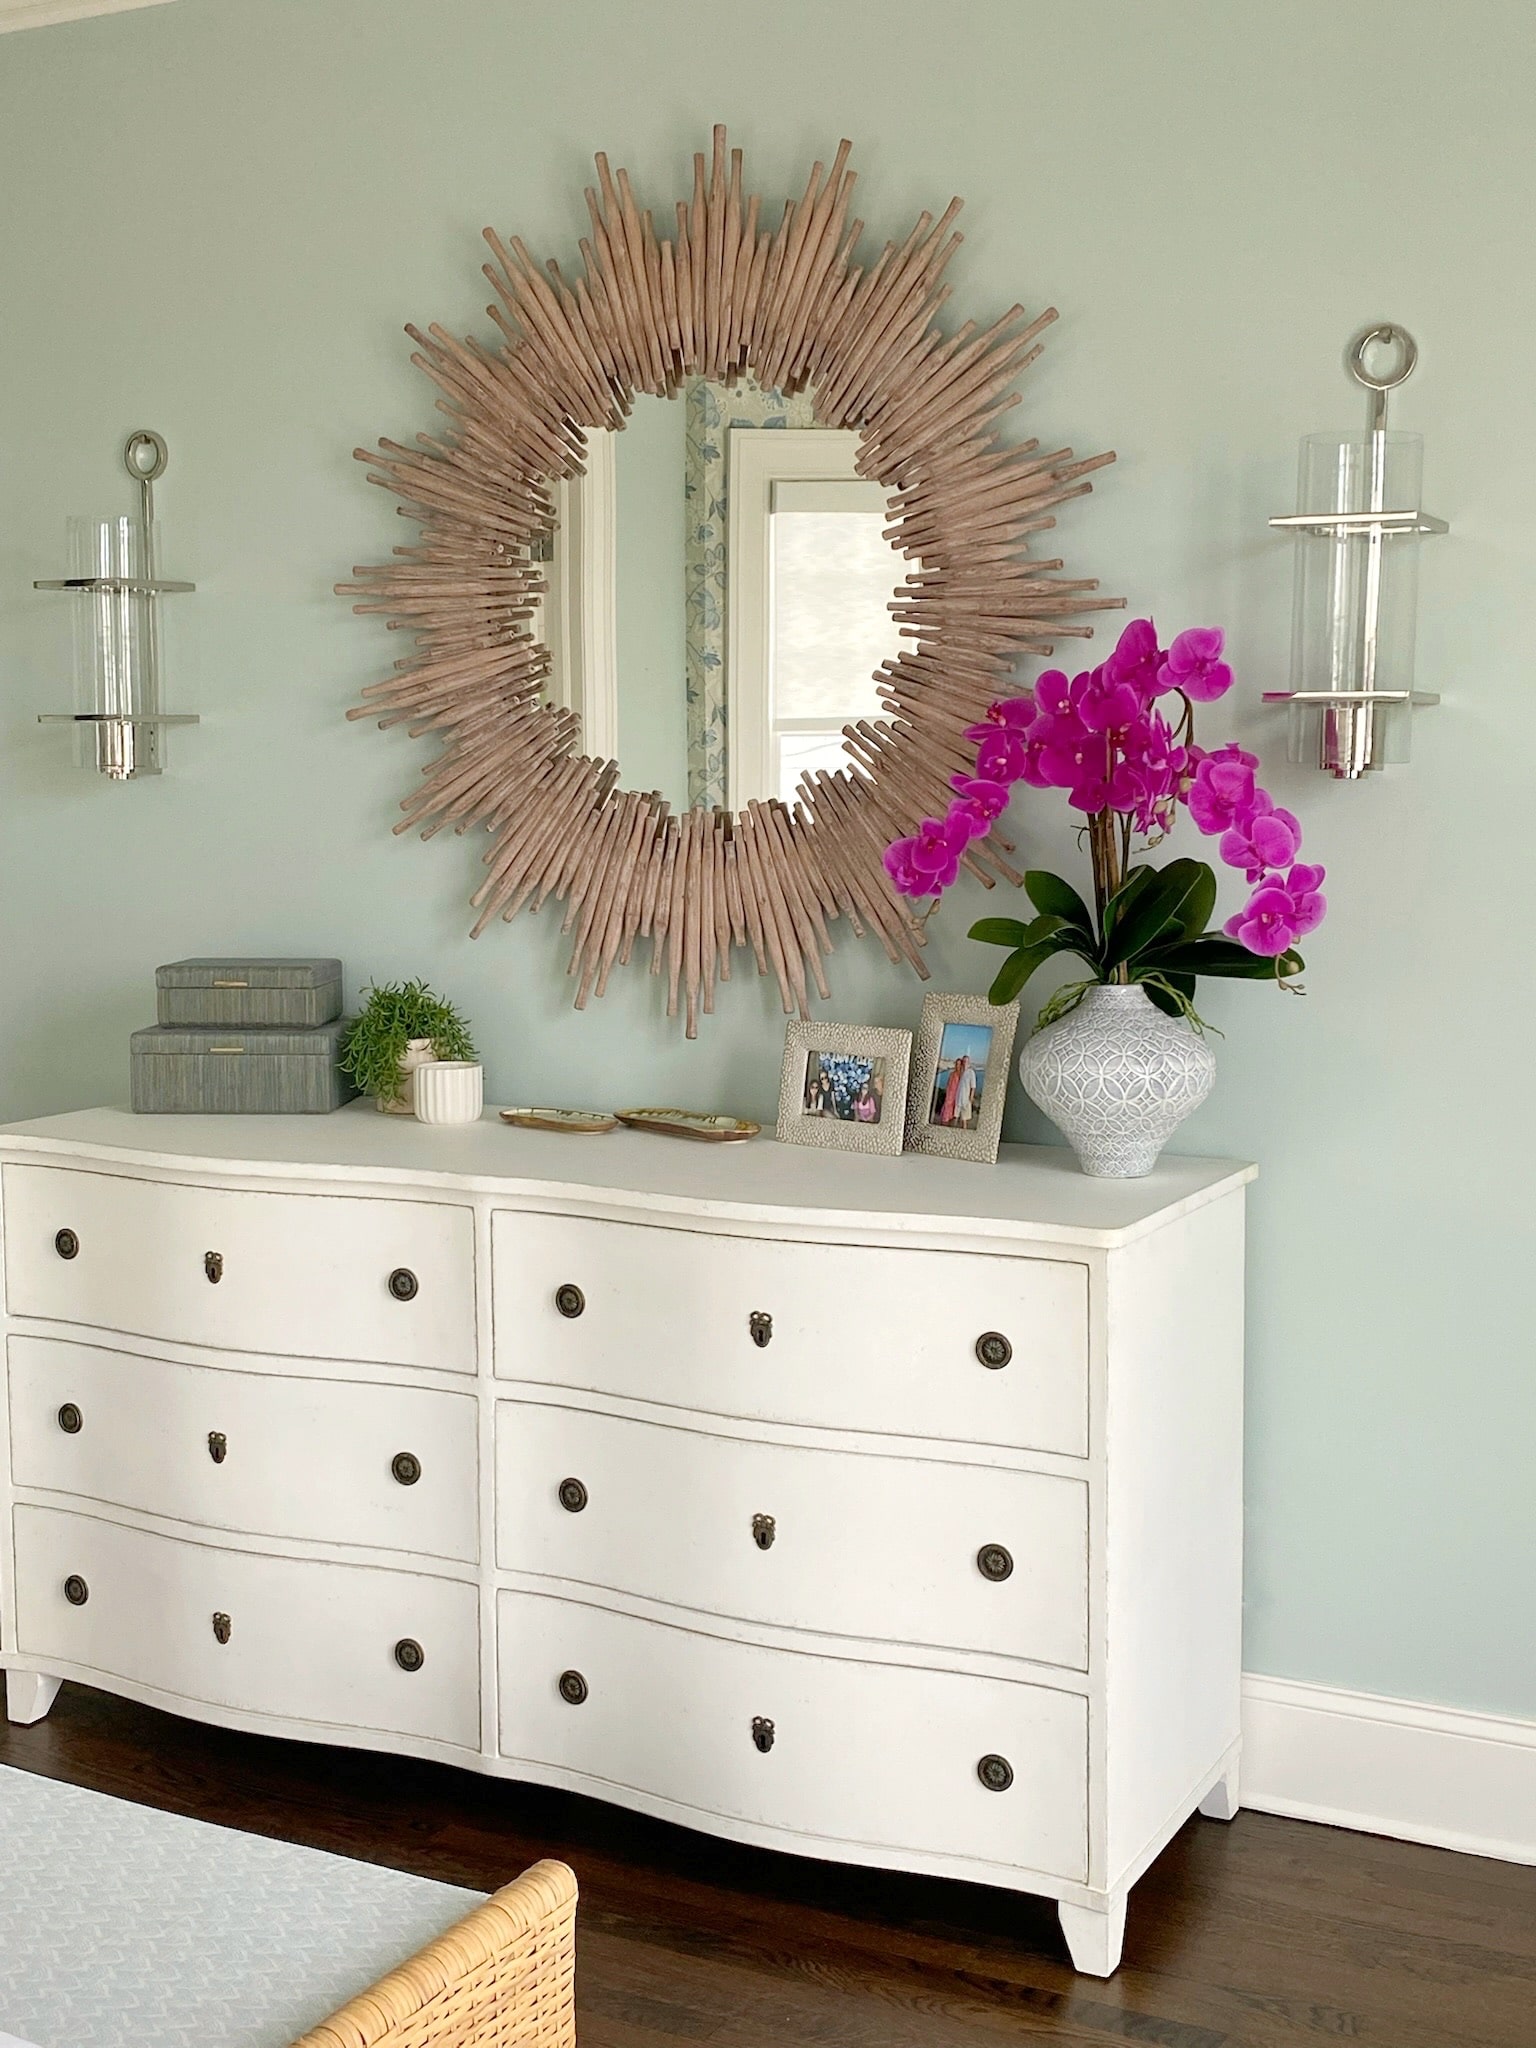 A white dresser adorned with a beautiful sunburst mirror, perfect for adding an elegant touch to any interior design.